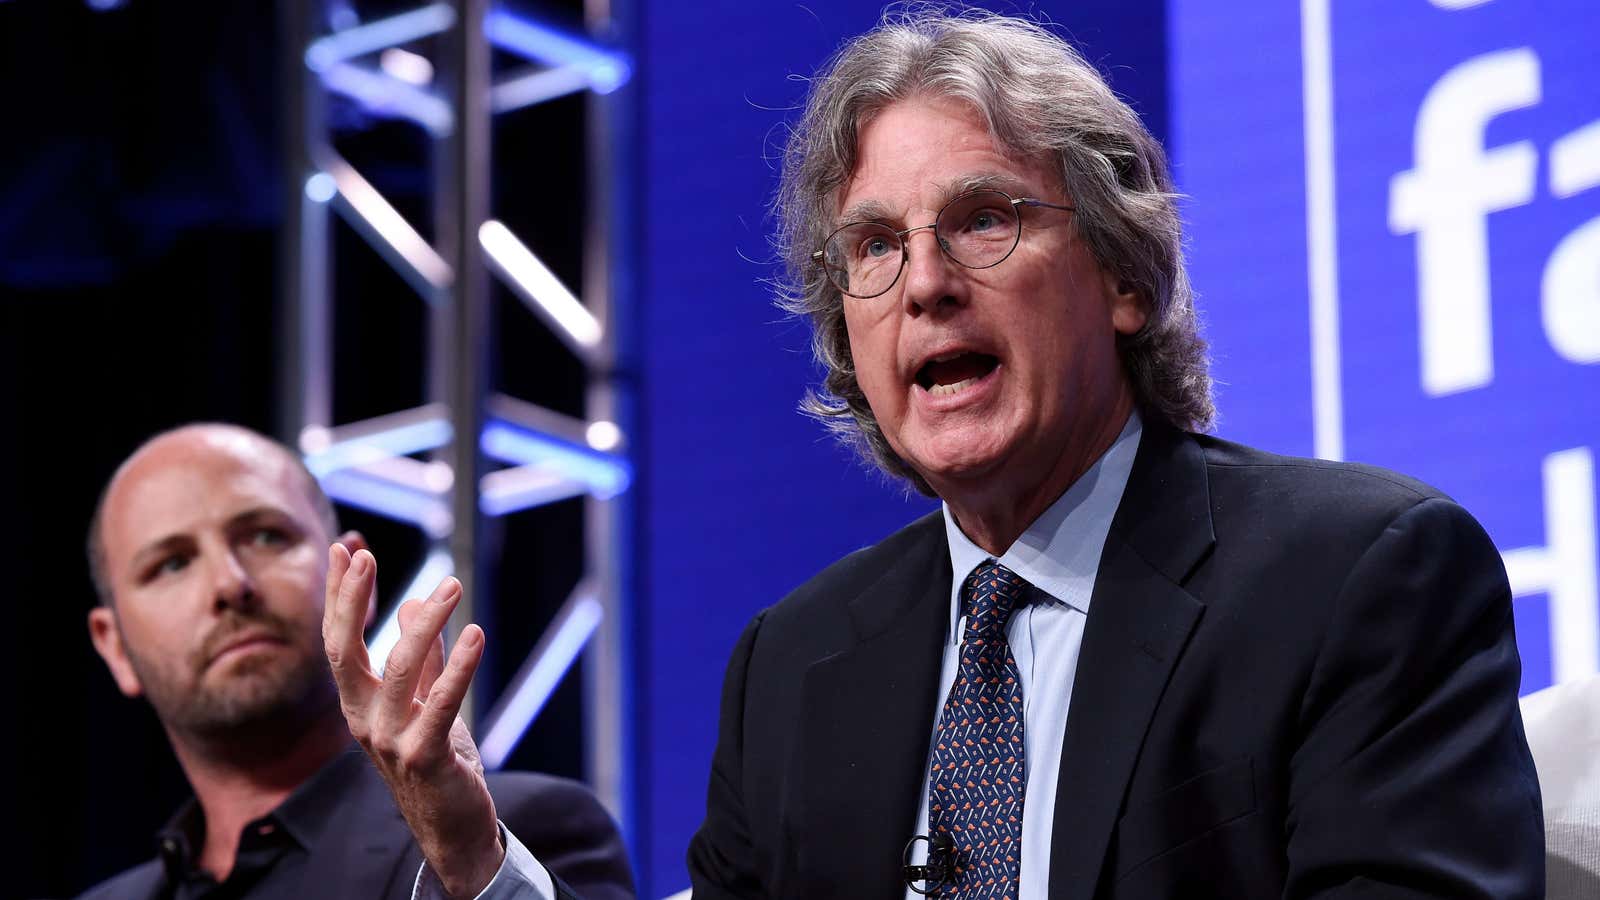 Roger McNamee is the author of “Zucked.”